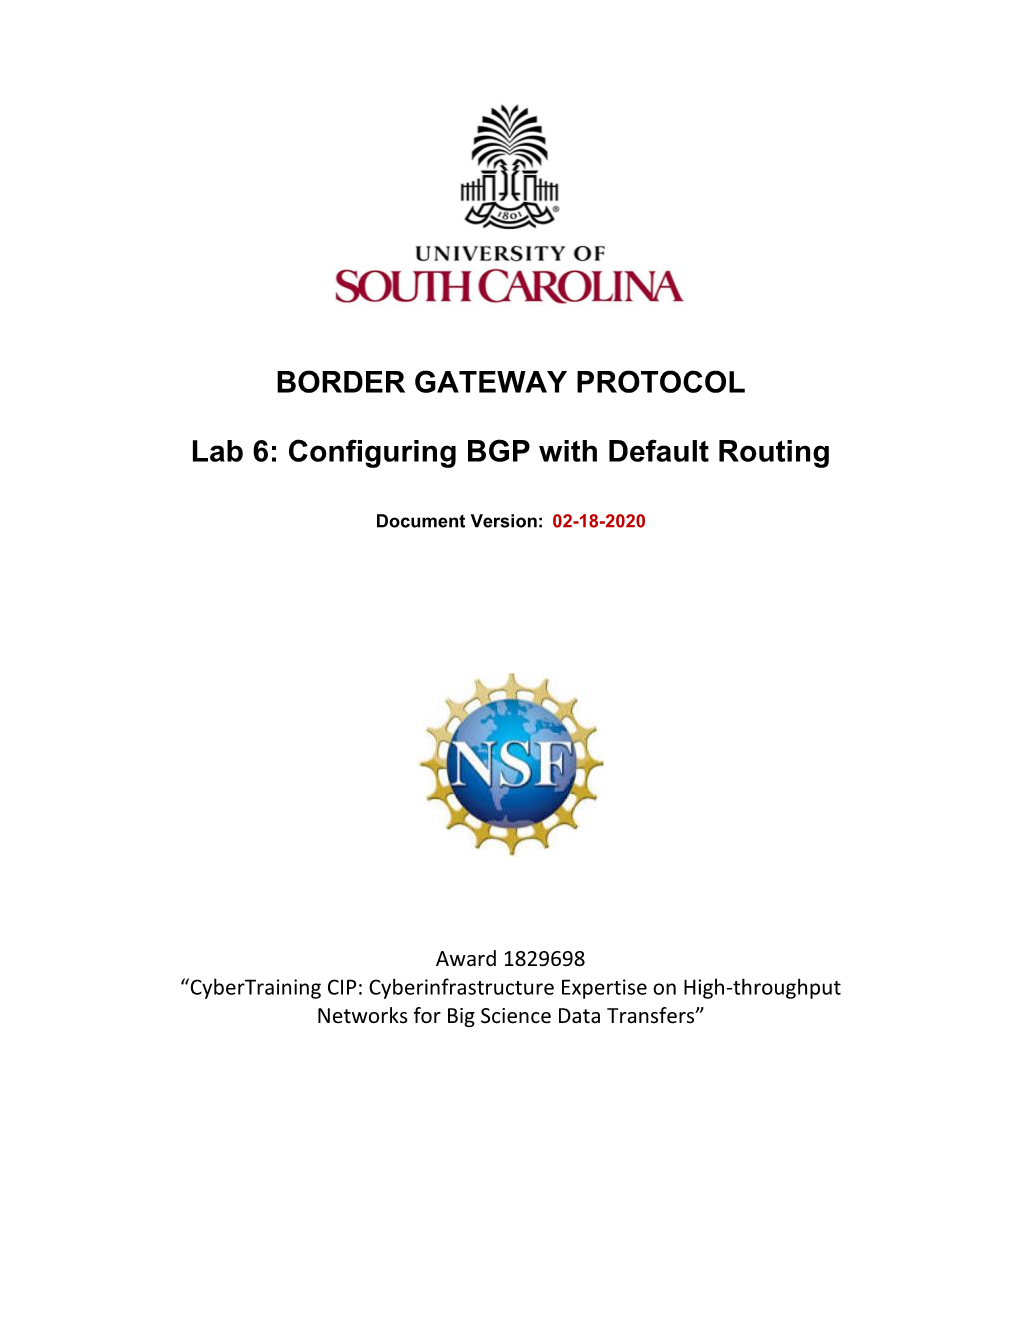 Lab 6 Configuring BGP with Default Routing